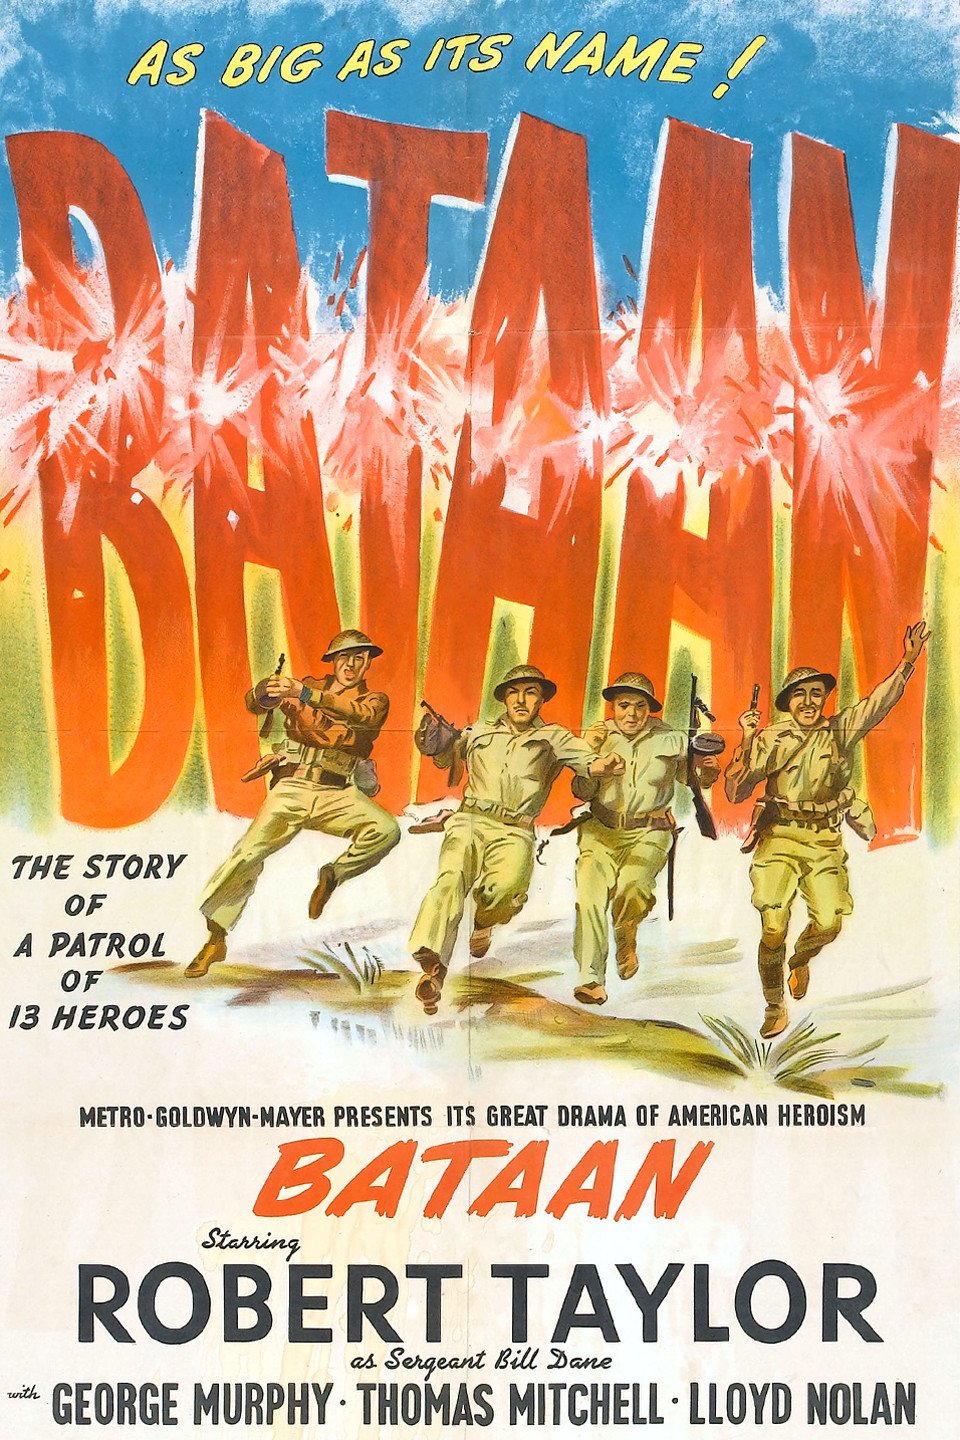 Poster of the movie Bataan